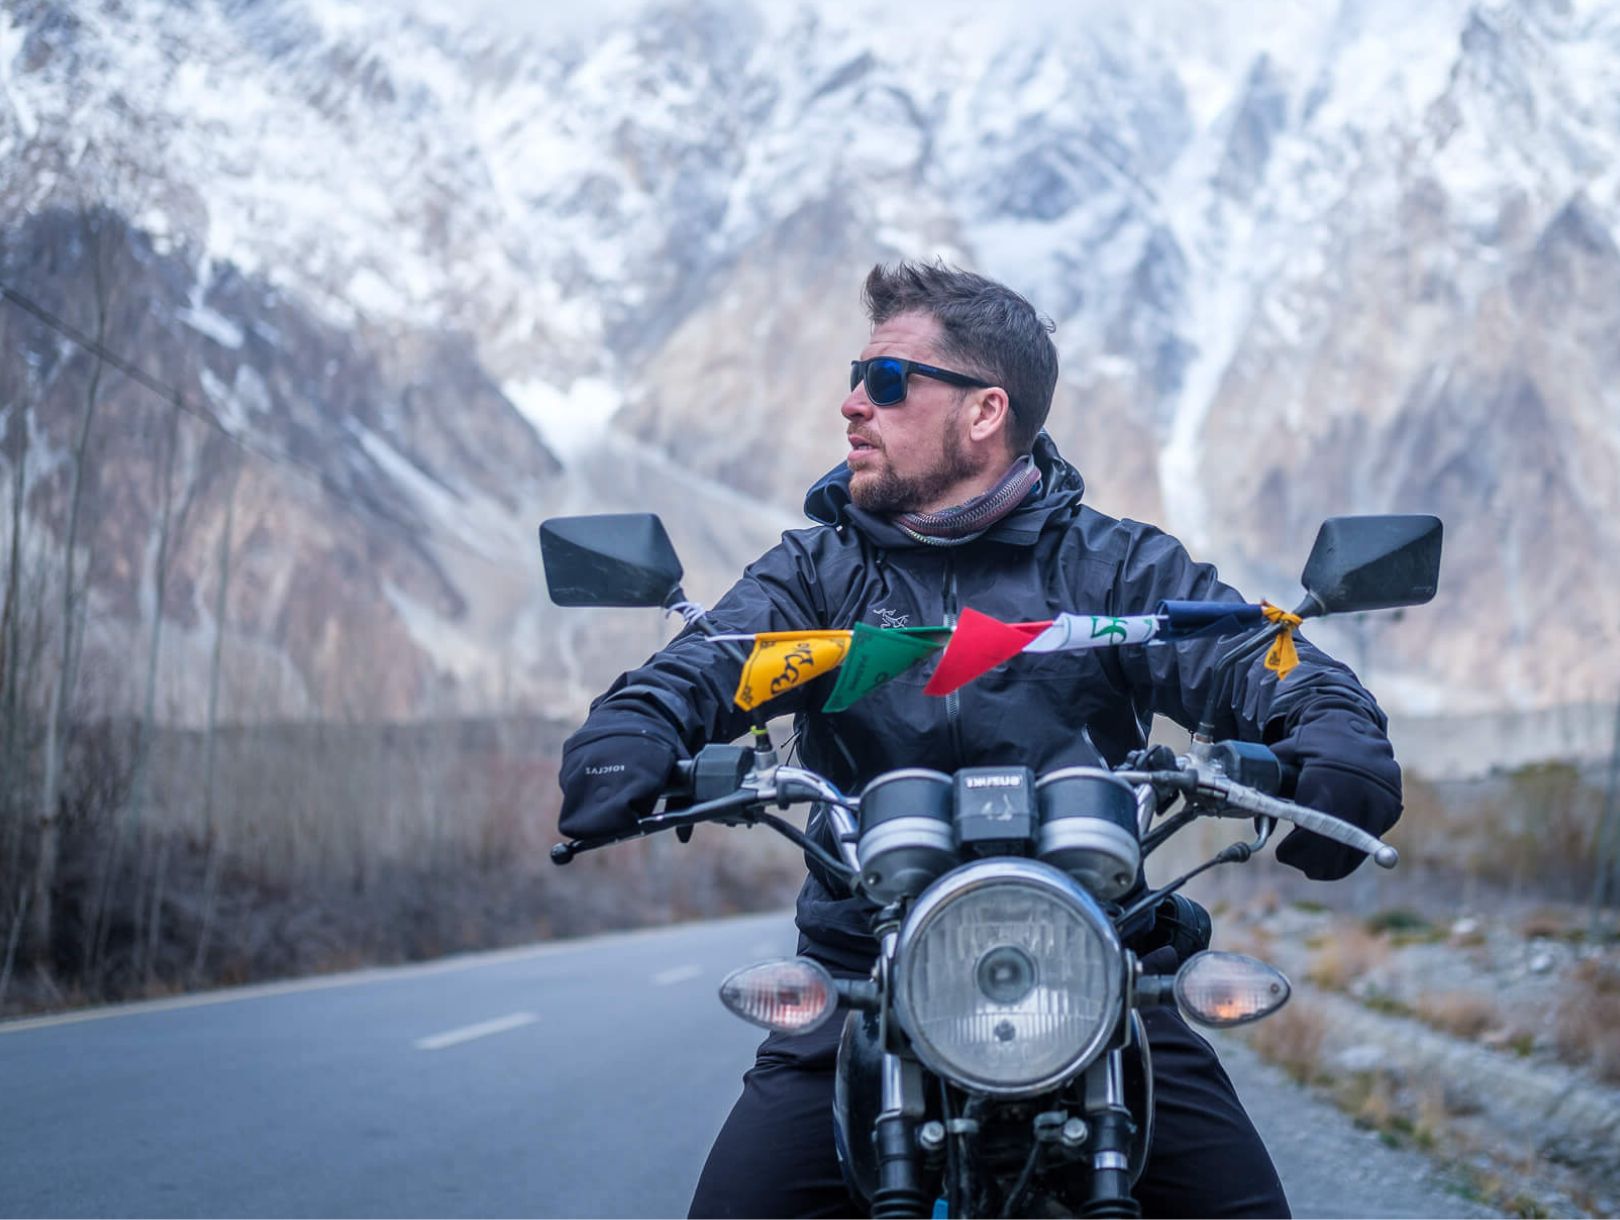 will sitting on a Pakistani motorcycle strung with tibetan prayer flags with massive snow-covered peaks behind him